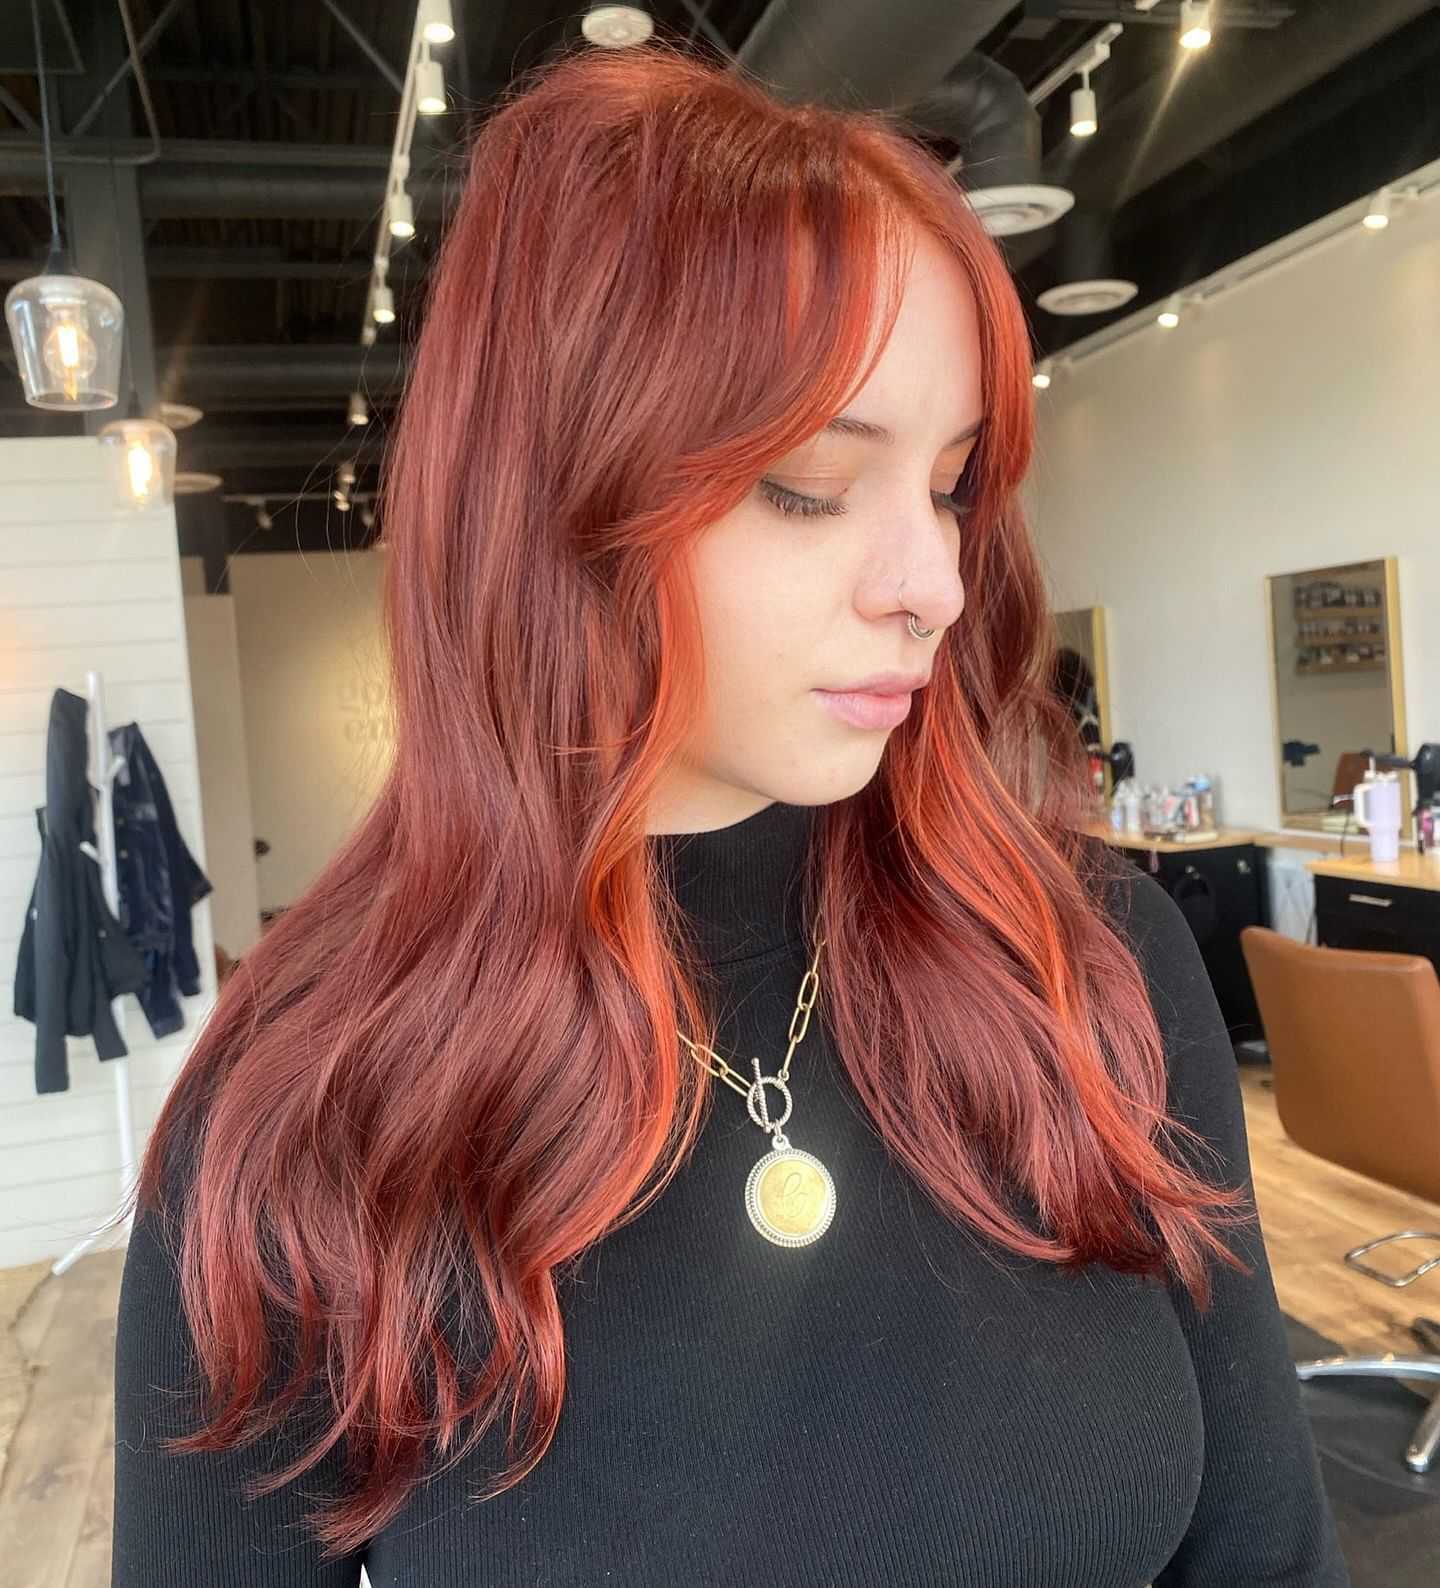 Woman with vibrant red hair and a nose ring, standing in a salon.